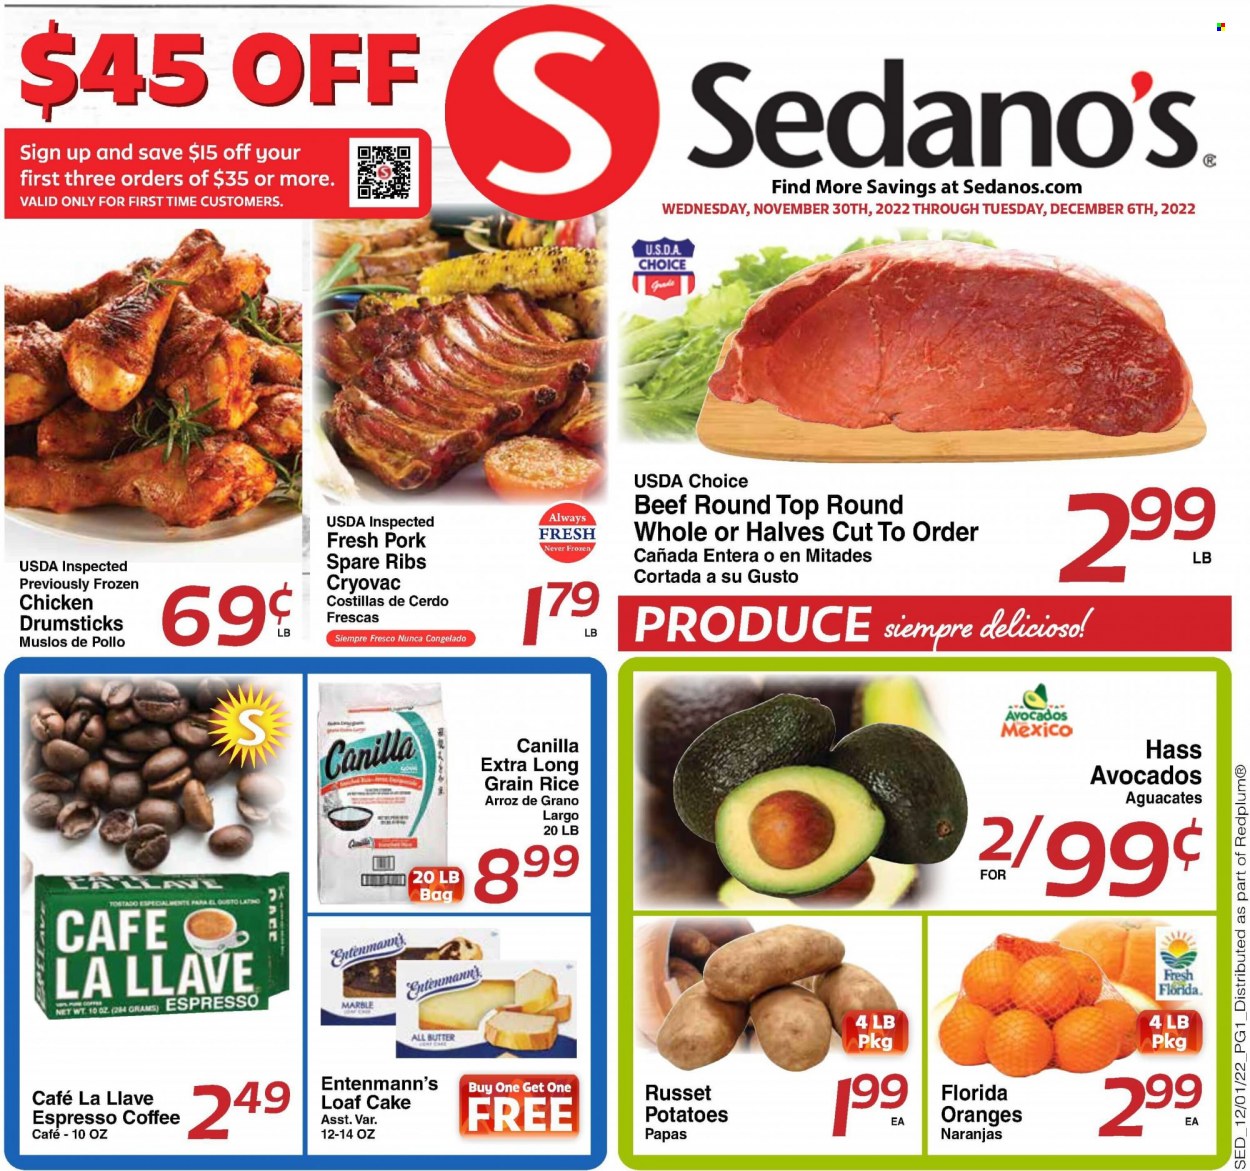 thumbnail - Sedano's Flyer - 11/30/2022 - 12/06/2022 - Sales products - cake, loaf cake, Entenmann's, russet potatoes, potatoes, avocado, oranges, rice, long grain rice, coffee, chicken drumsticks, pork meat, pork ribs, pork spare ribs. Page 1.